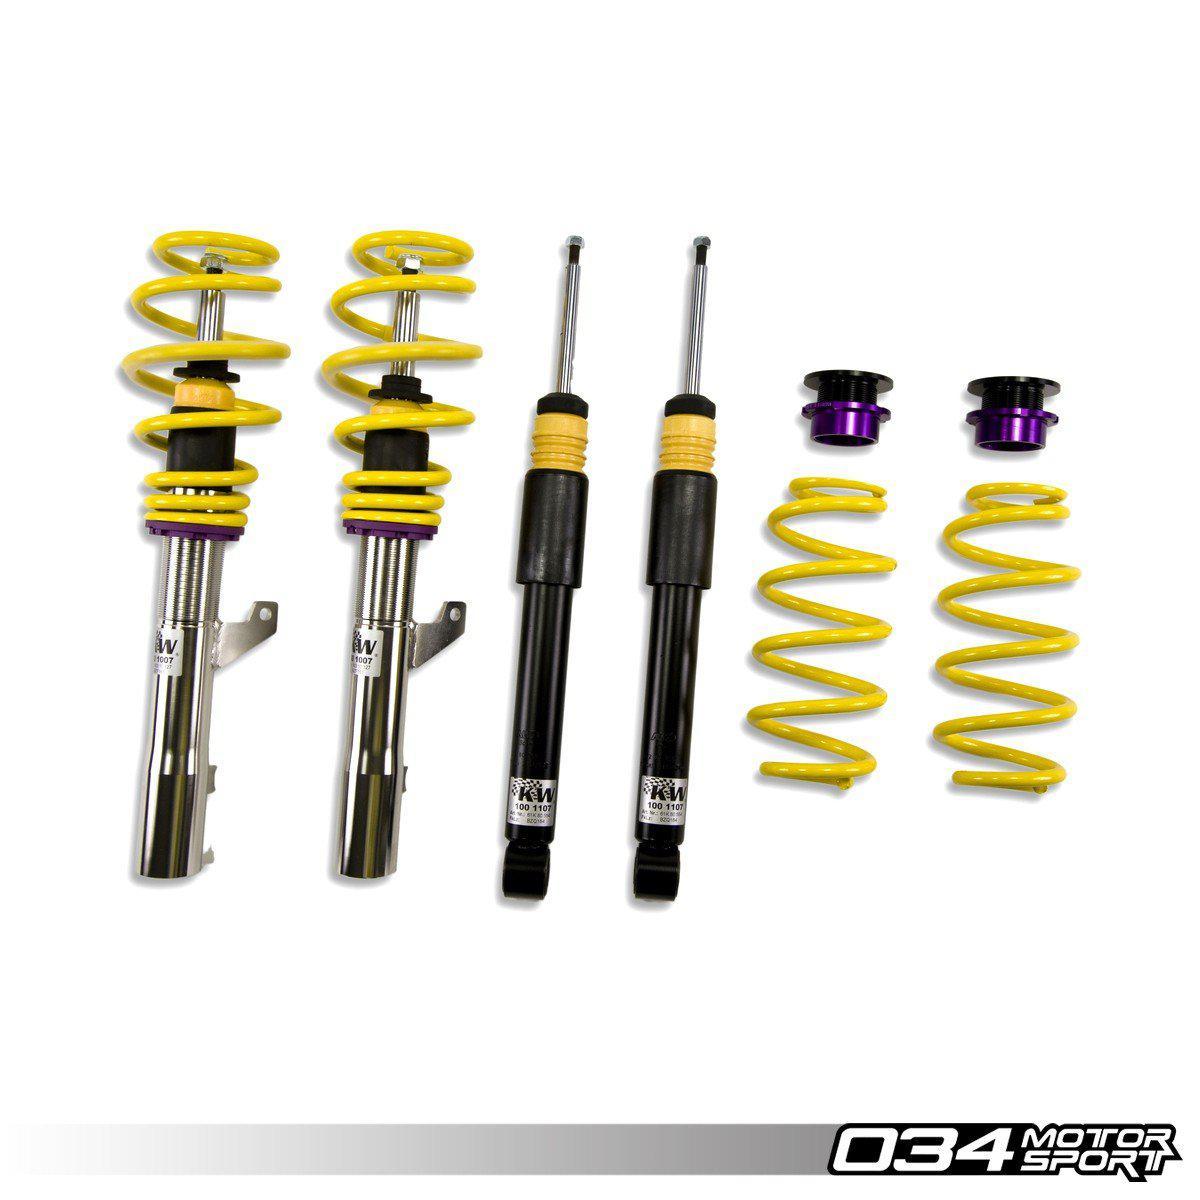 KW Variant 3 Coilover Suspension, B8 Audi A4/A5/S4/S5/RS5 FWD & Quattro Without Electronic Dampening-A Little Tuning Co